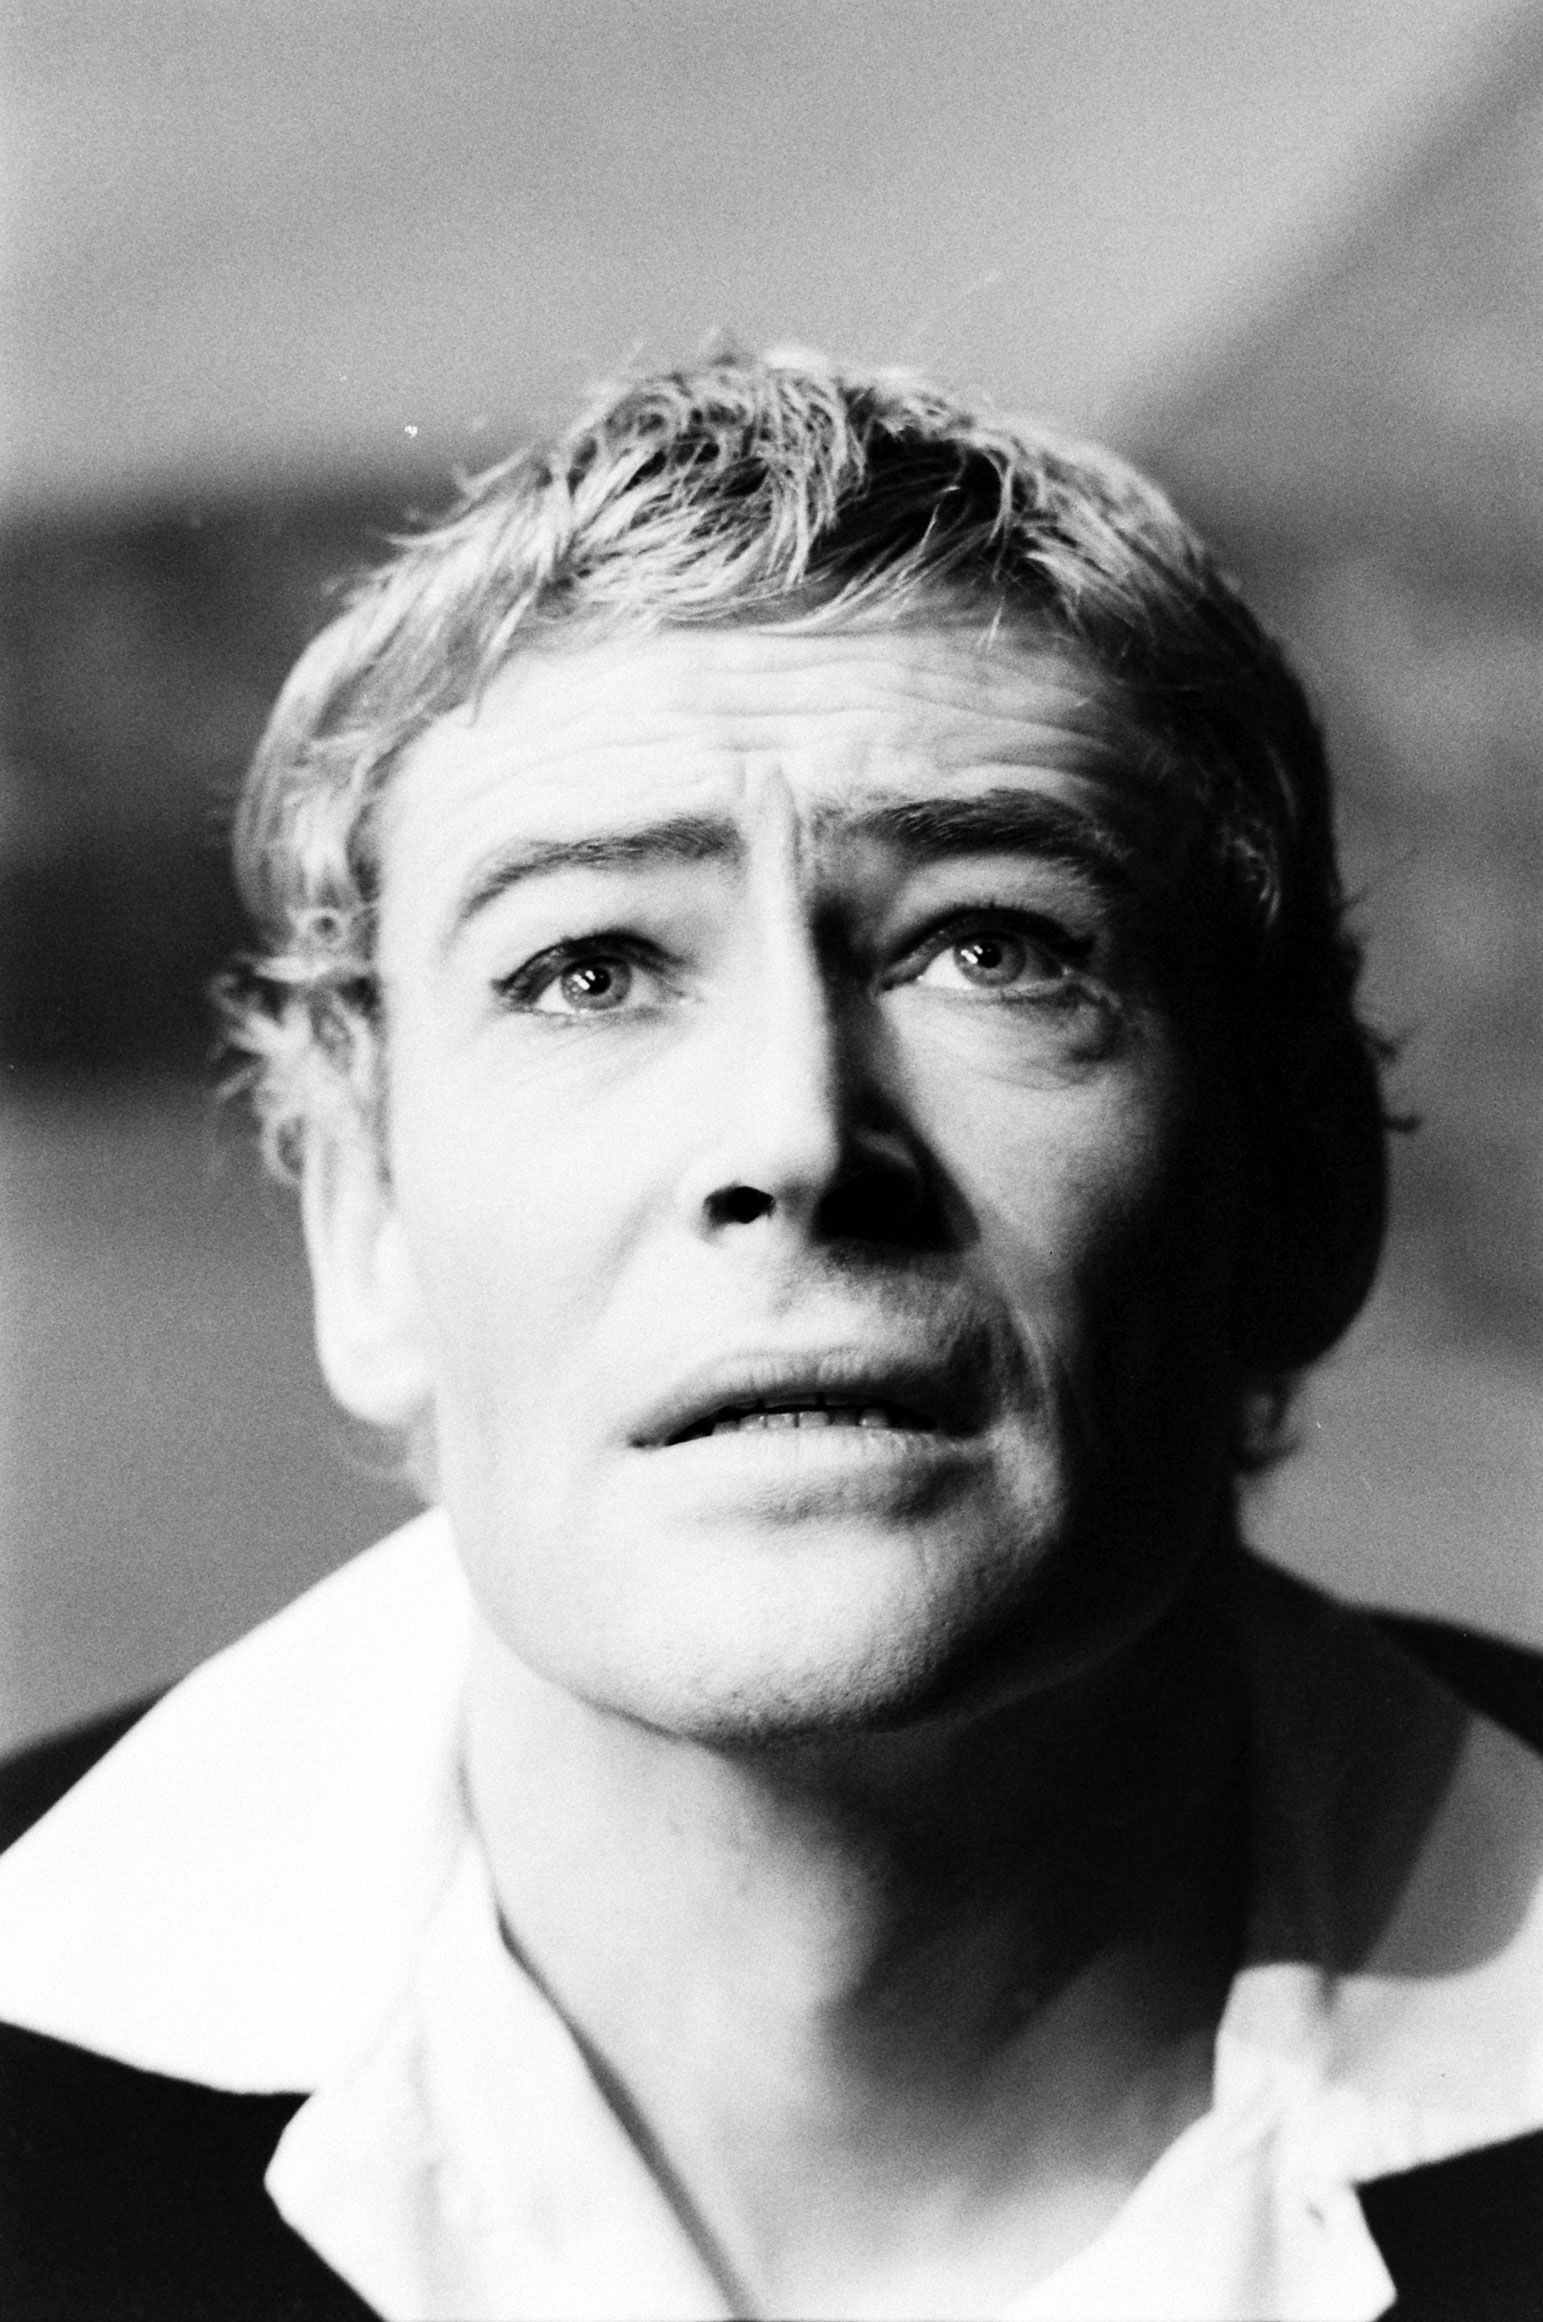 Peter O'Toole as Hamlet in 1963